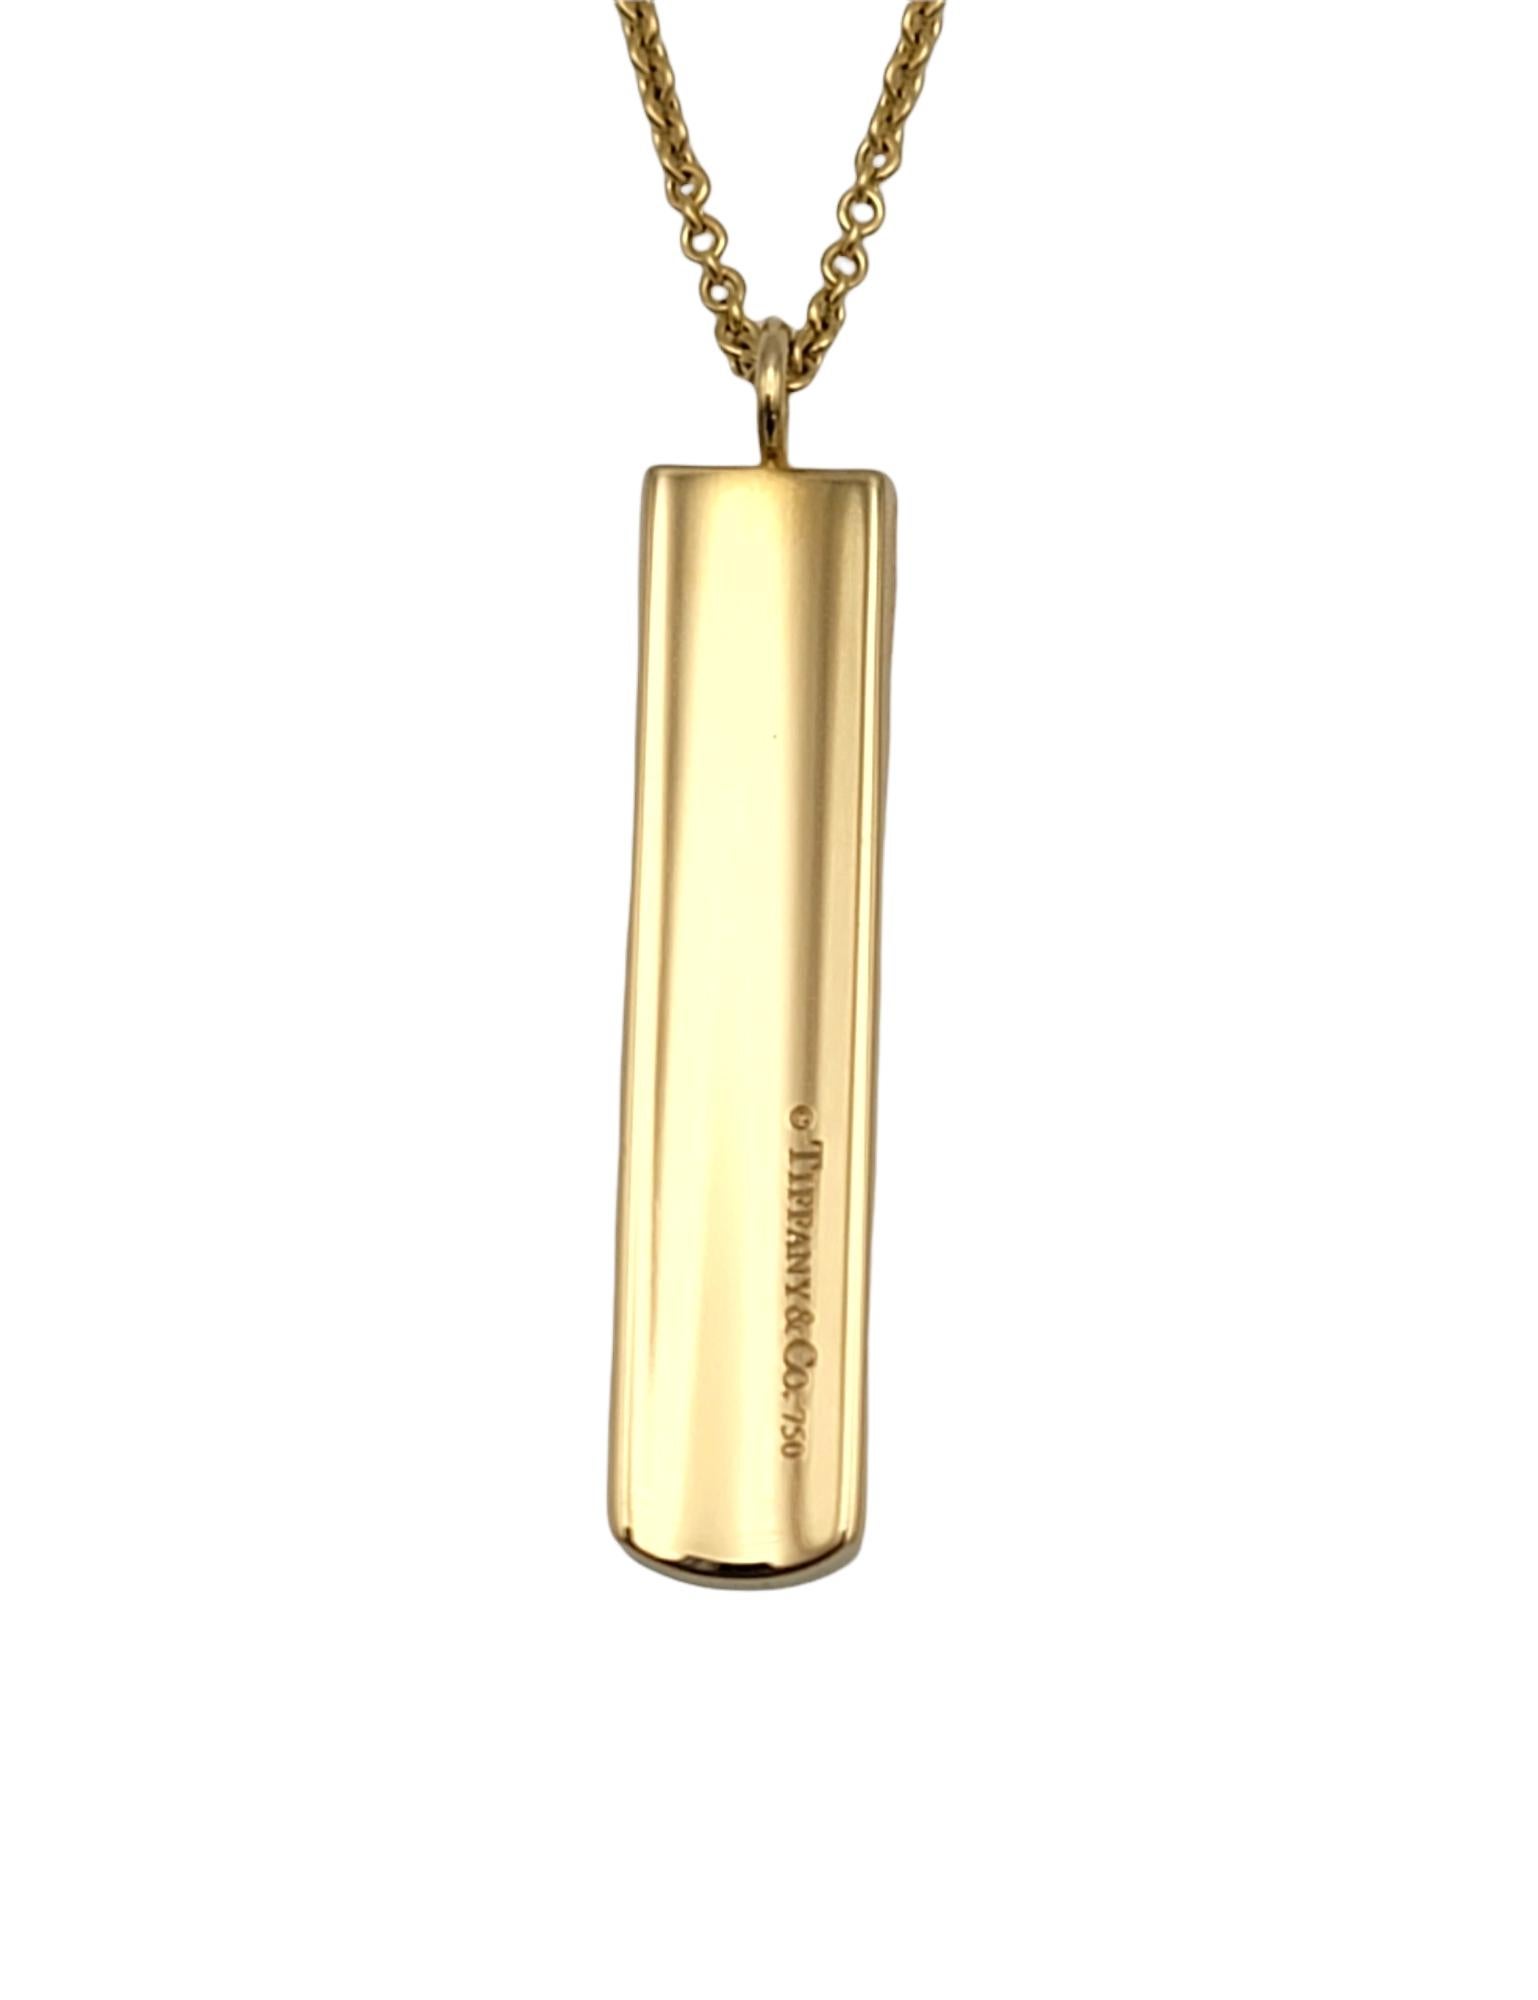 Chic engraved bar necklace by Tiffany & Co. is the epitome of modern elegance. The simple yet timeless design makes for a piece that you will wear time and time again.  

Metal: 18K Yellow Gold
Weight: 17.4 grams
Chain Length: 20